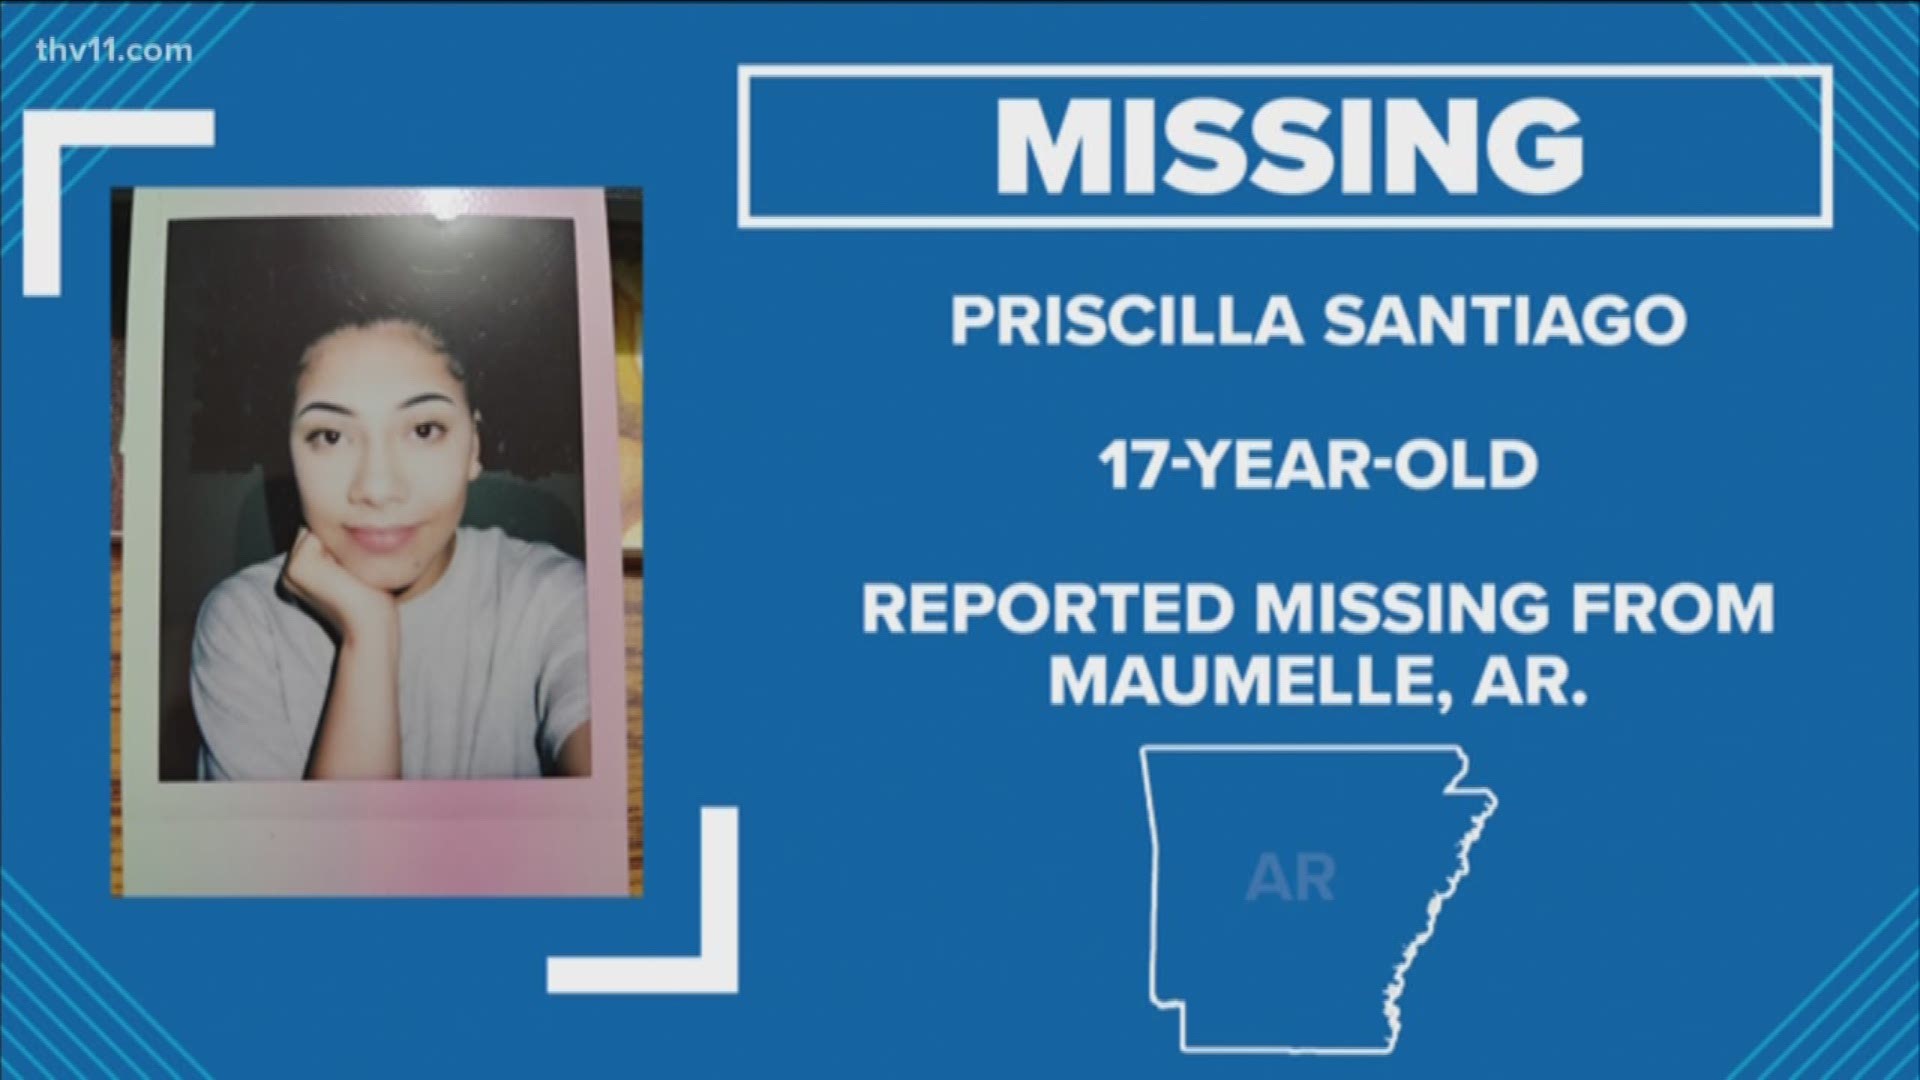 In a mission home alert this morning Maumelle police need your help finding a missing 17-year-old.